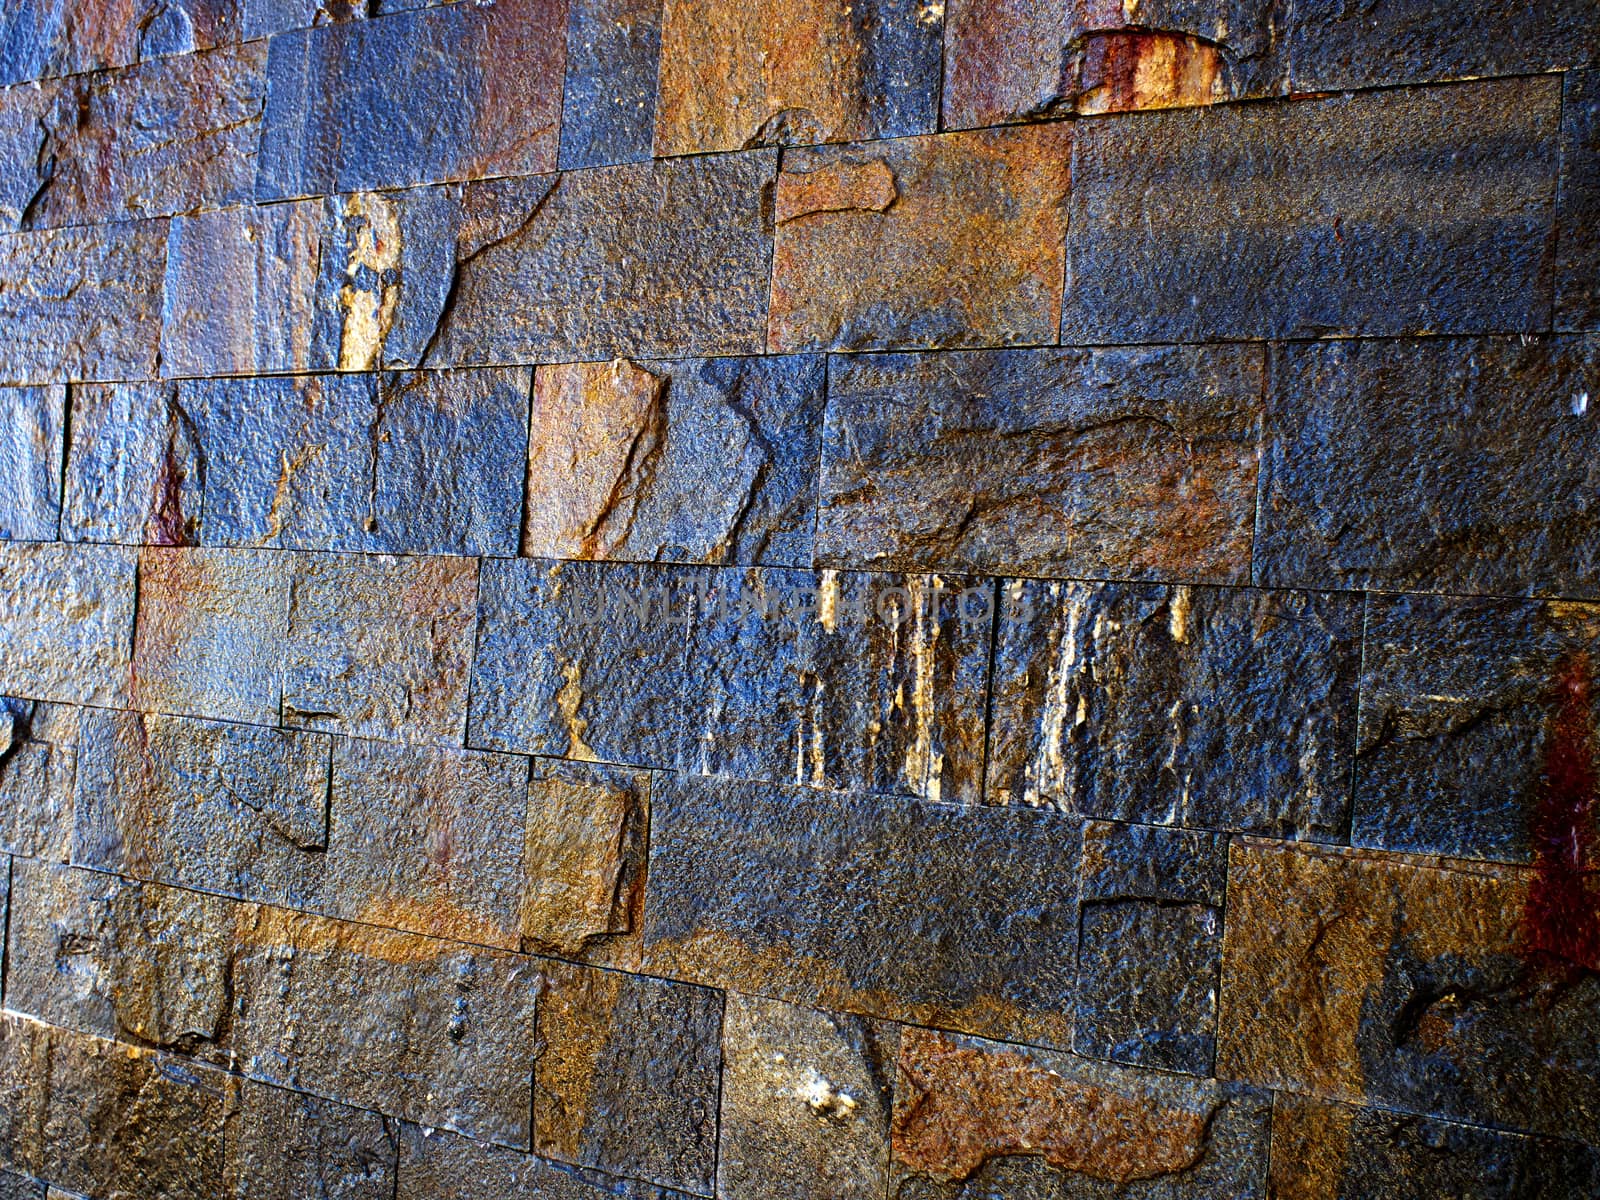 Details of decorative stone wall in dark earth colors